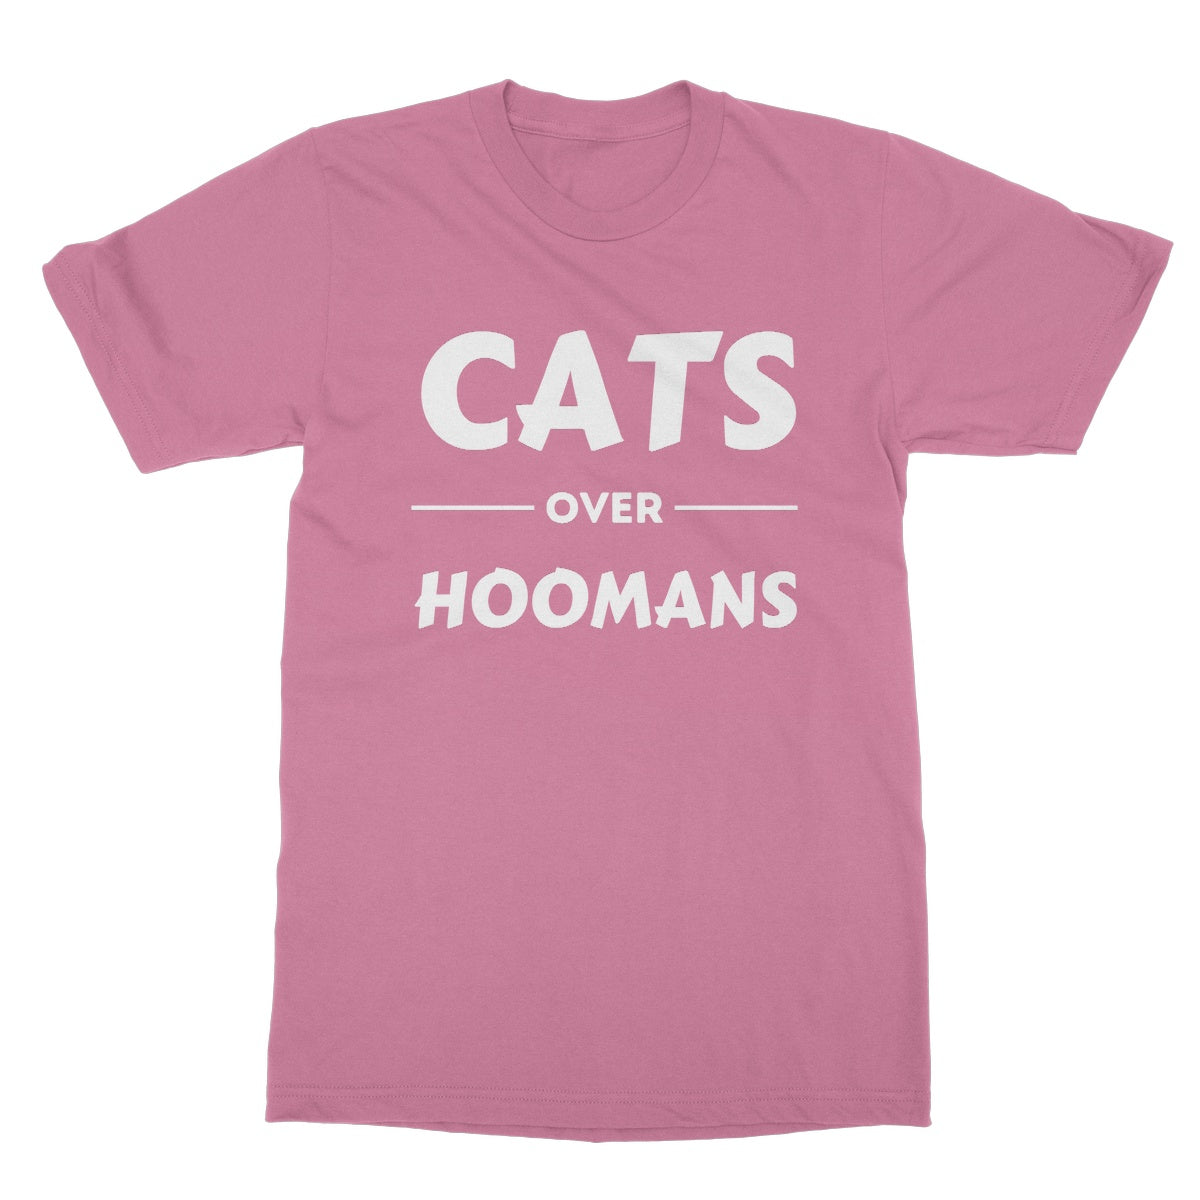 cats over hoomans t shirt pink